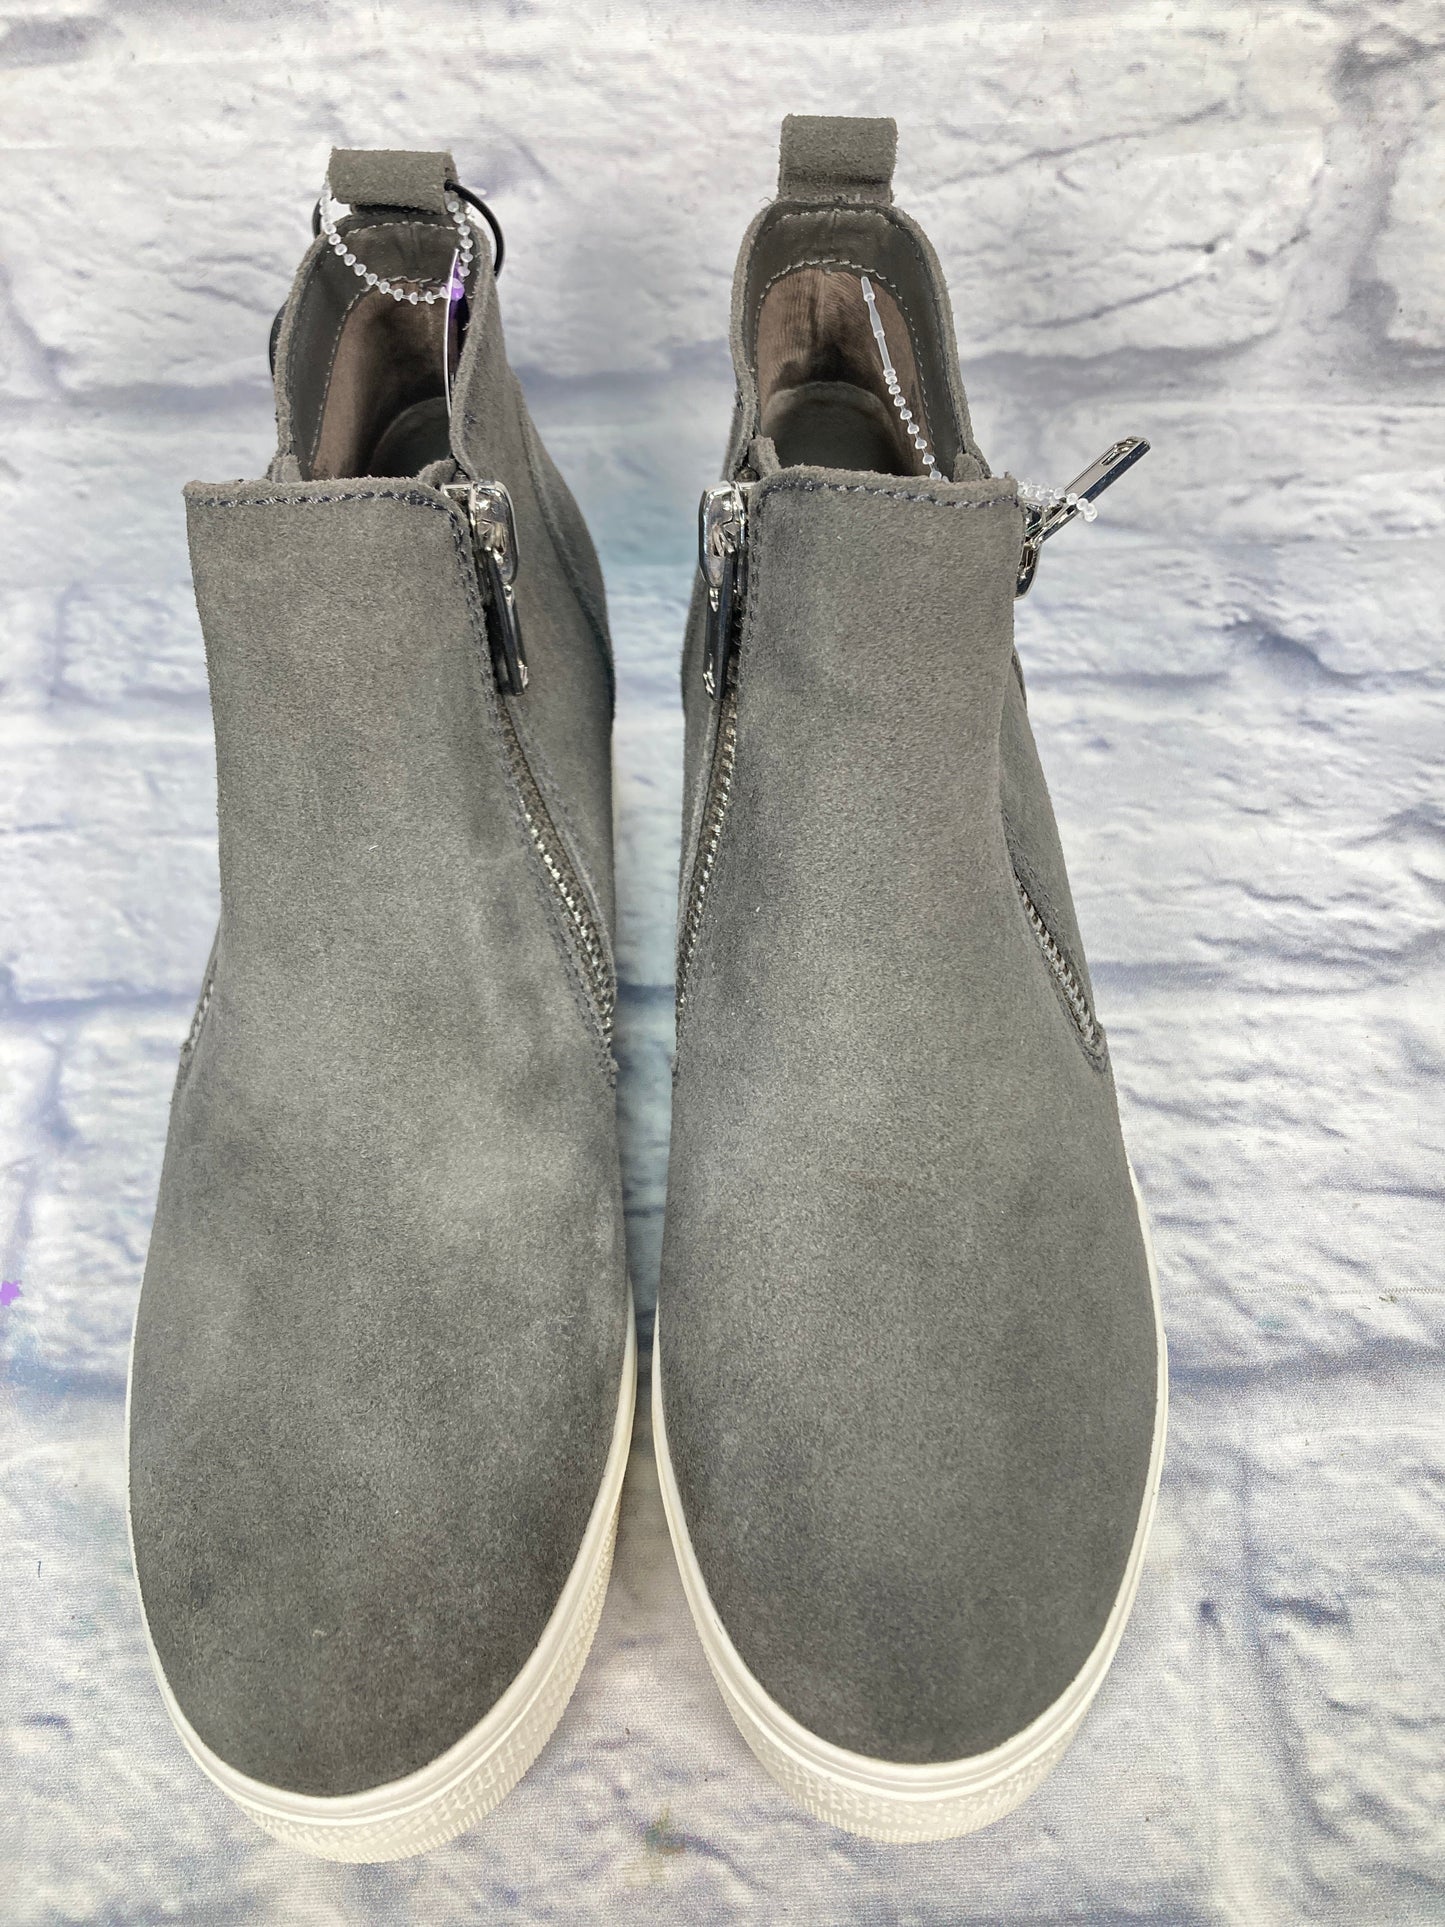 Grey Boots Ankle Flats Steve Madden, Size 9